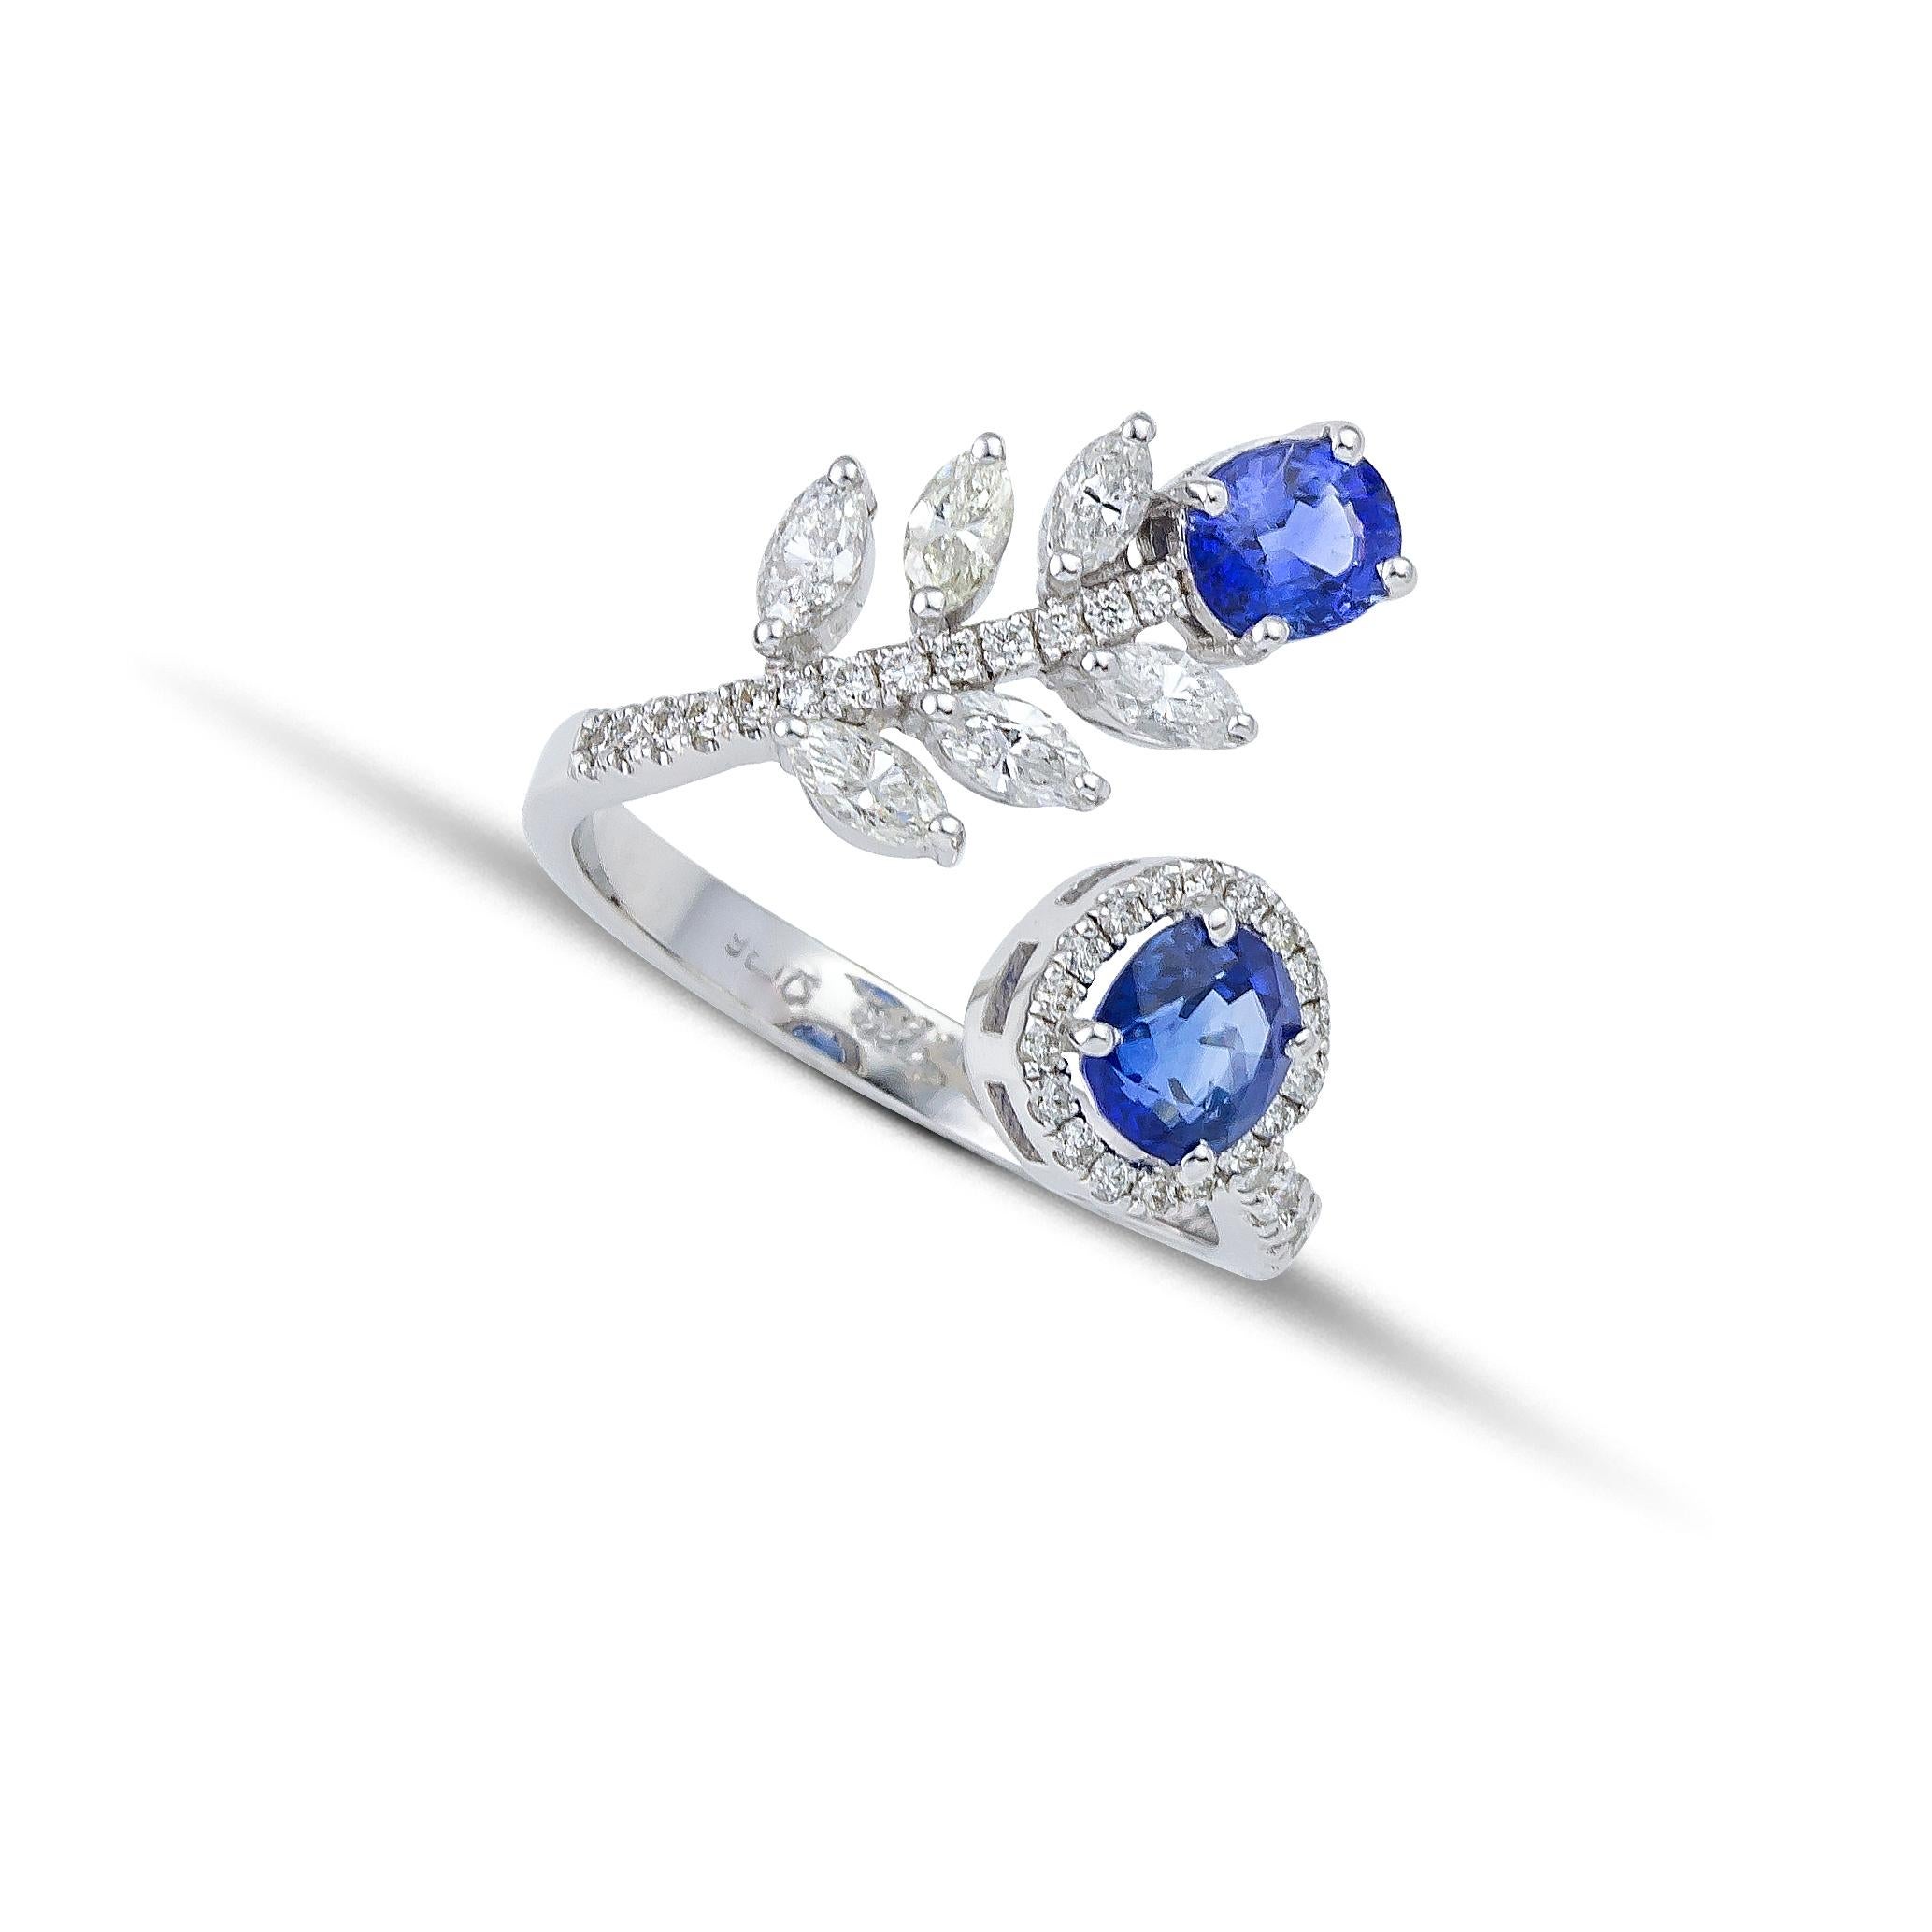 Flower Disconnected ring made of 18Kt white gold with two oval blue Sapphires and Diamonds Marquise & brilliant cut . Capturing the power of attraction, this unique ring is designed for those who dare to be different. The sapphires are carefully set